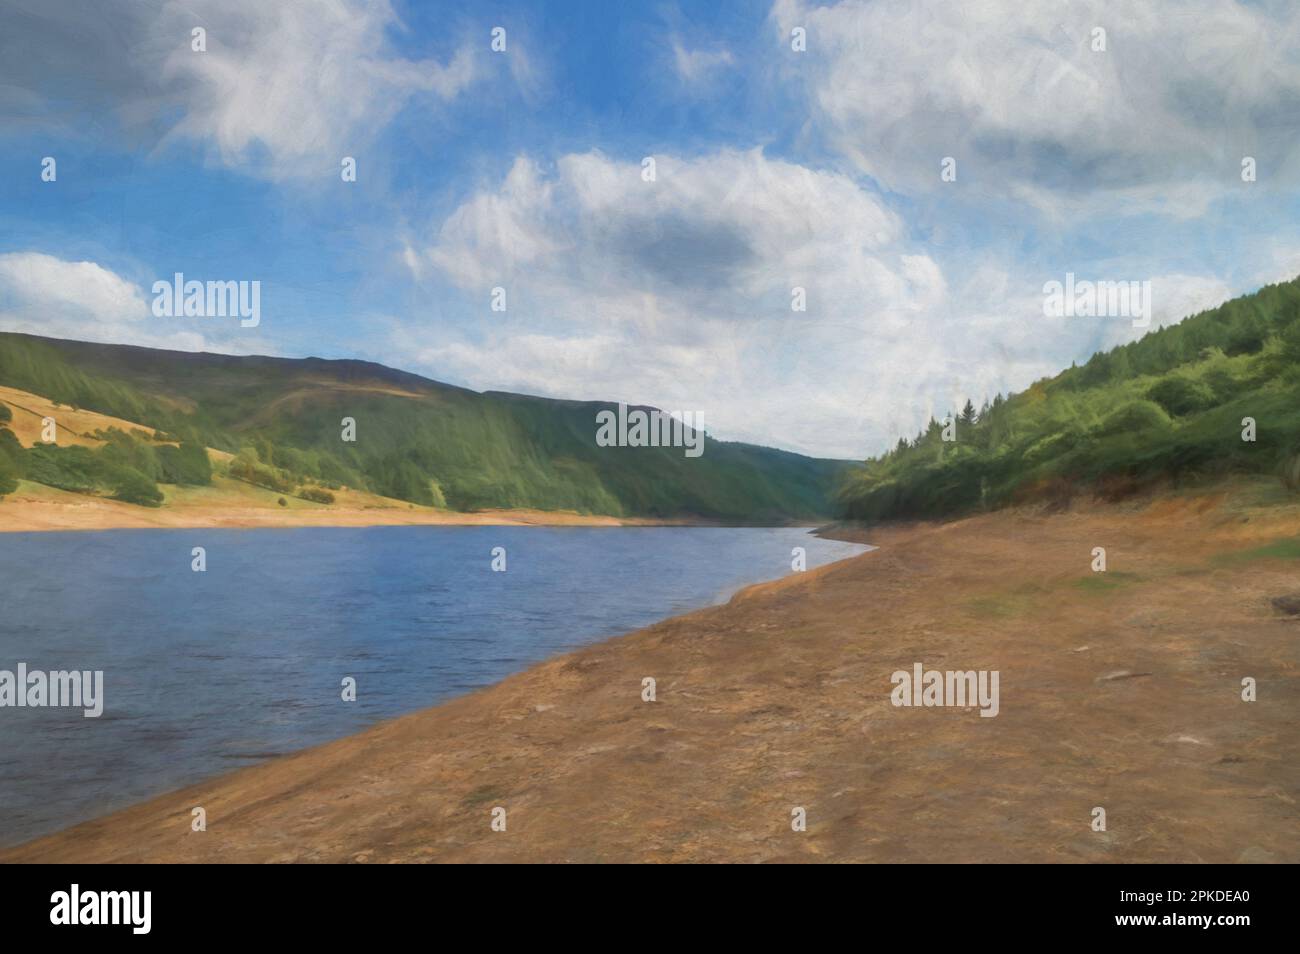 Digital painting of Ladybower Reservoir in the Upper Derwent Valley in the Peak District National Park. Stock Photo